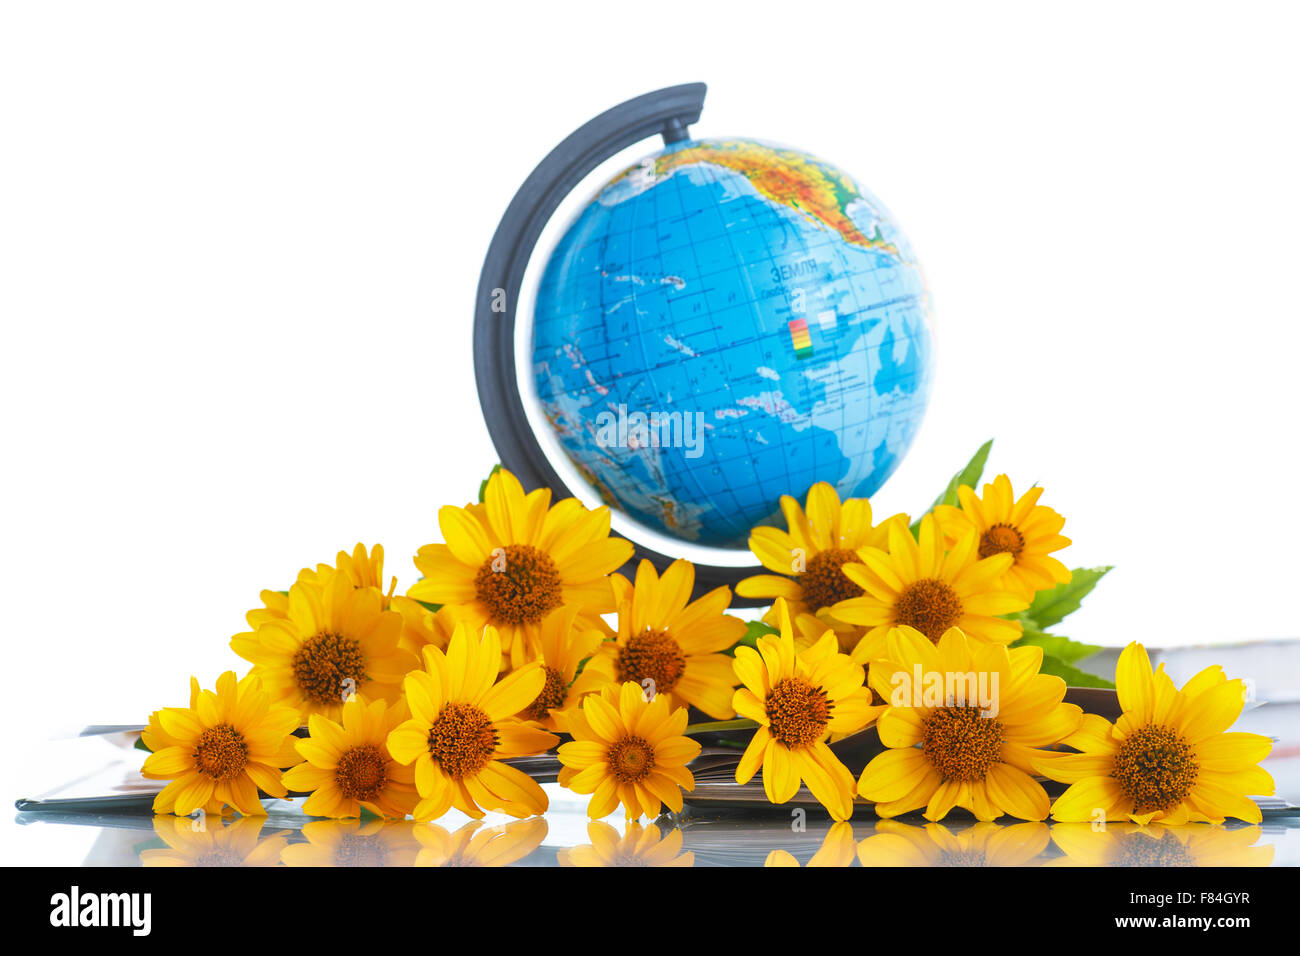 Globe with books and flowers Stock Photo